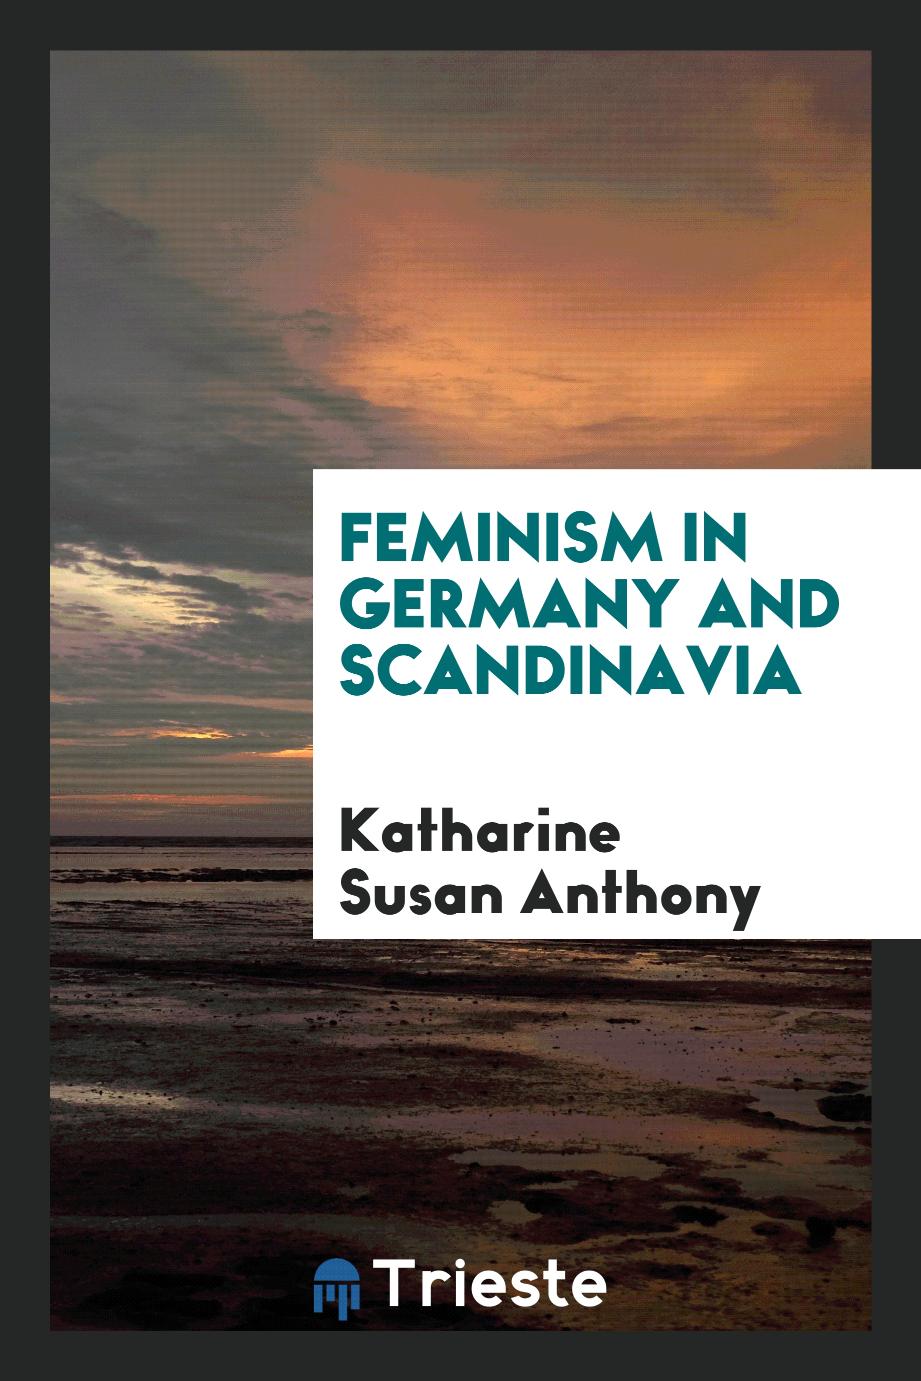 Feminism in Germany and Scandinavia